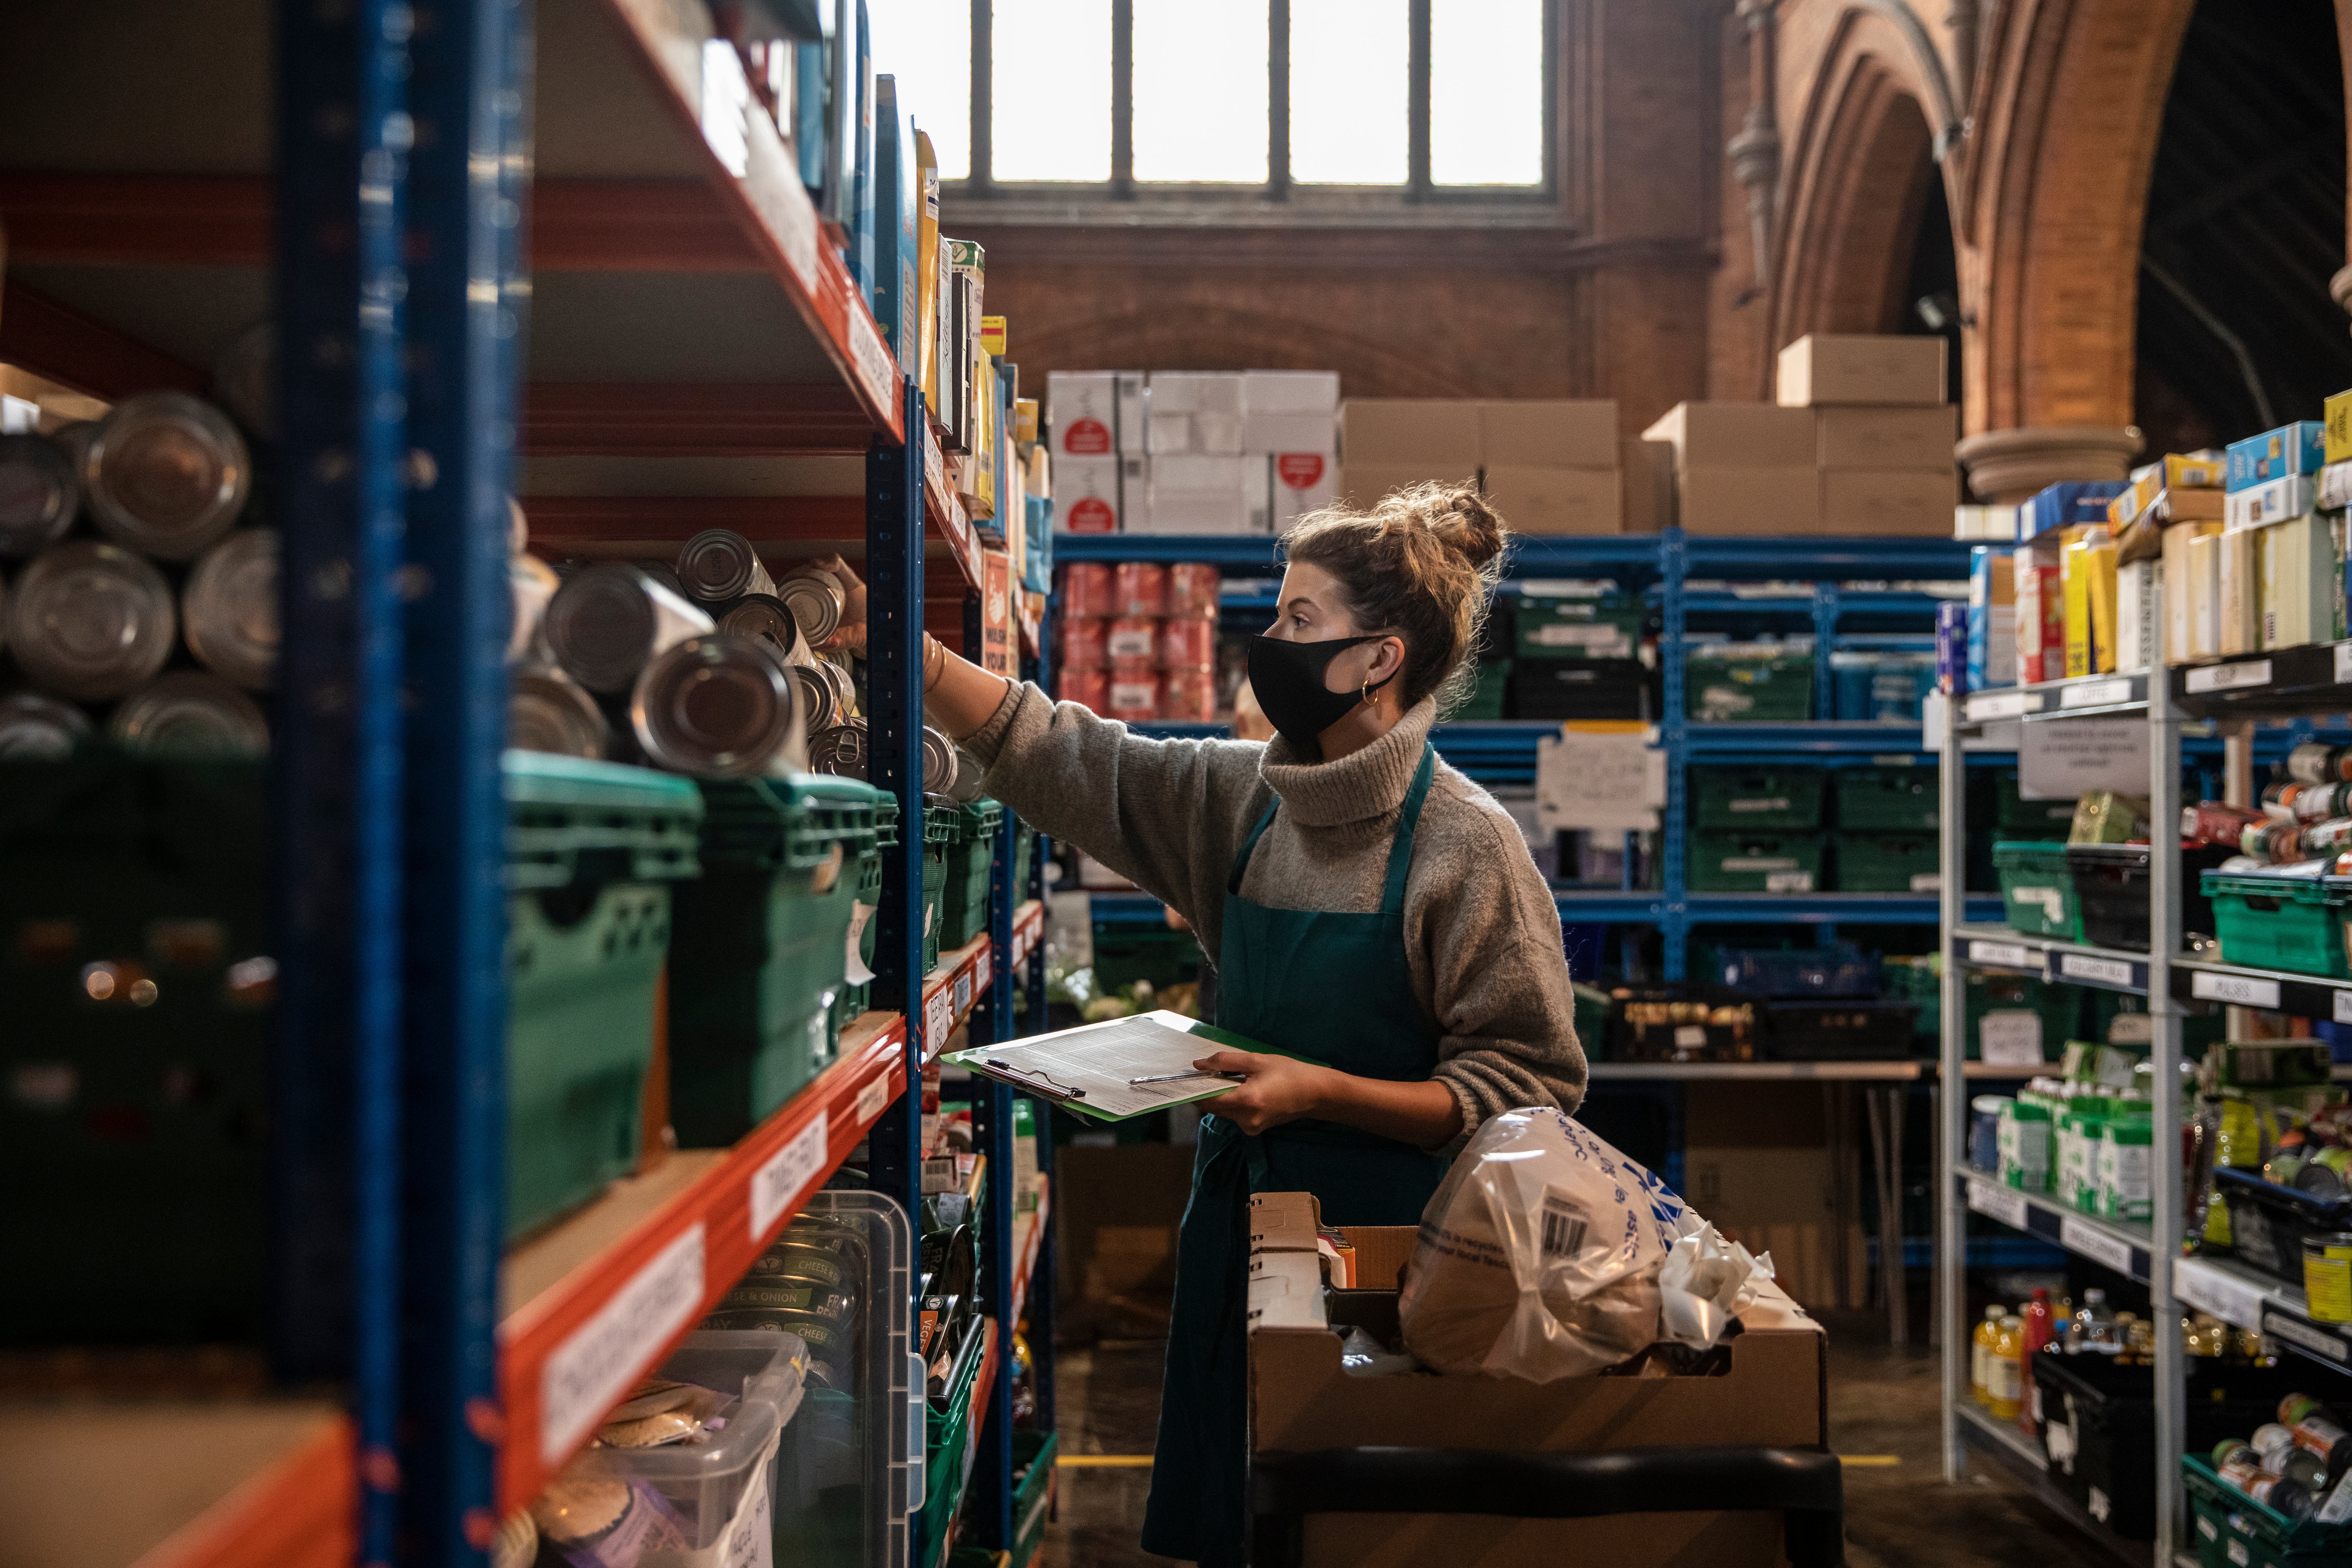 Tens of thousands of people have had to rely on food banks for the first time during the pandemic